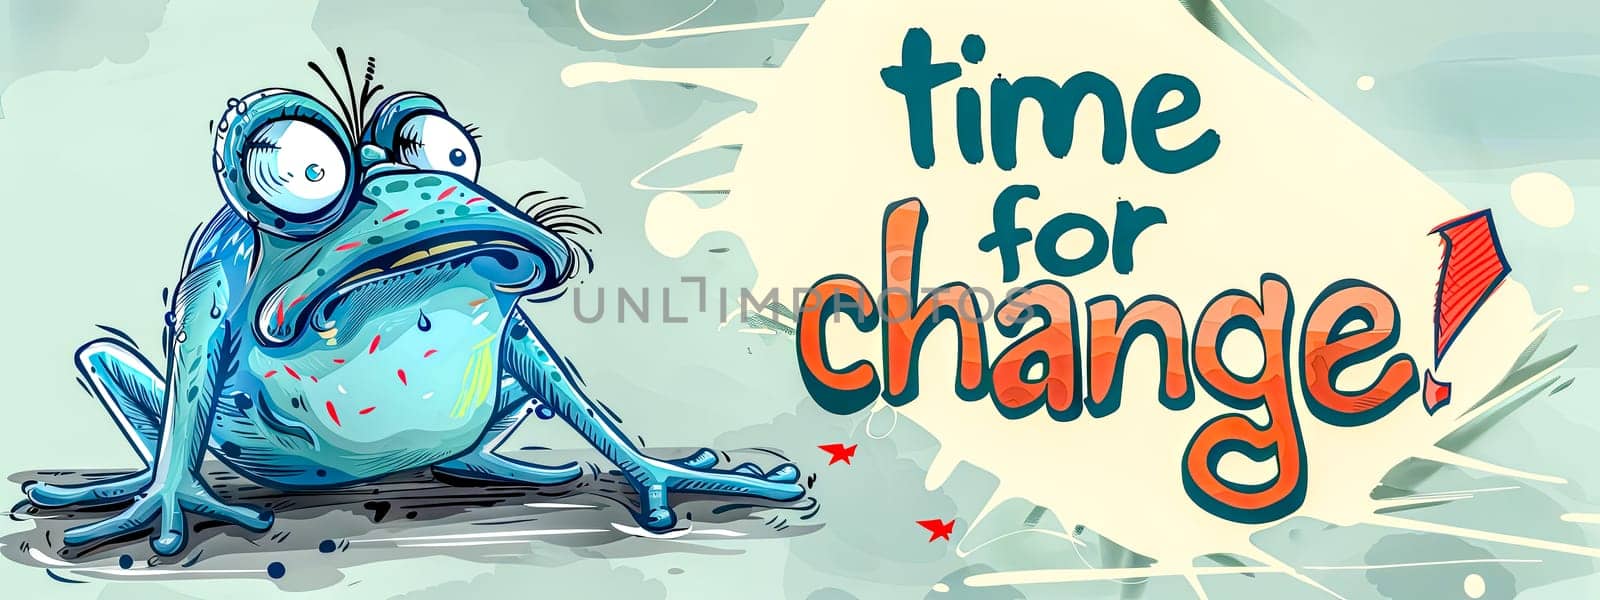 Cartoon frog with time for change message by Edophoto